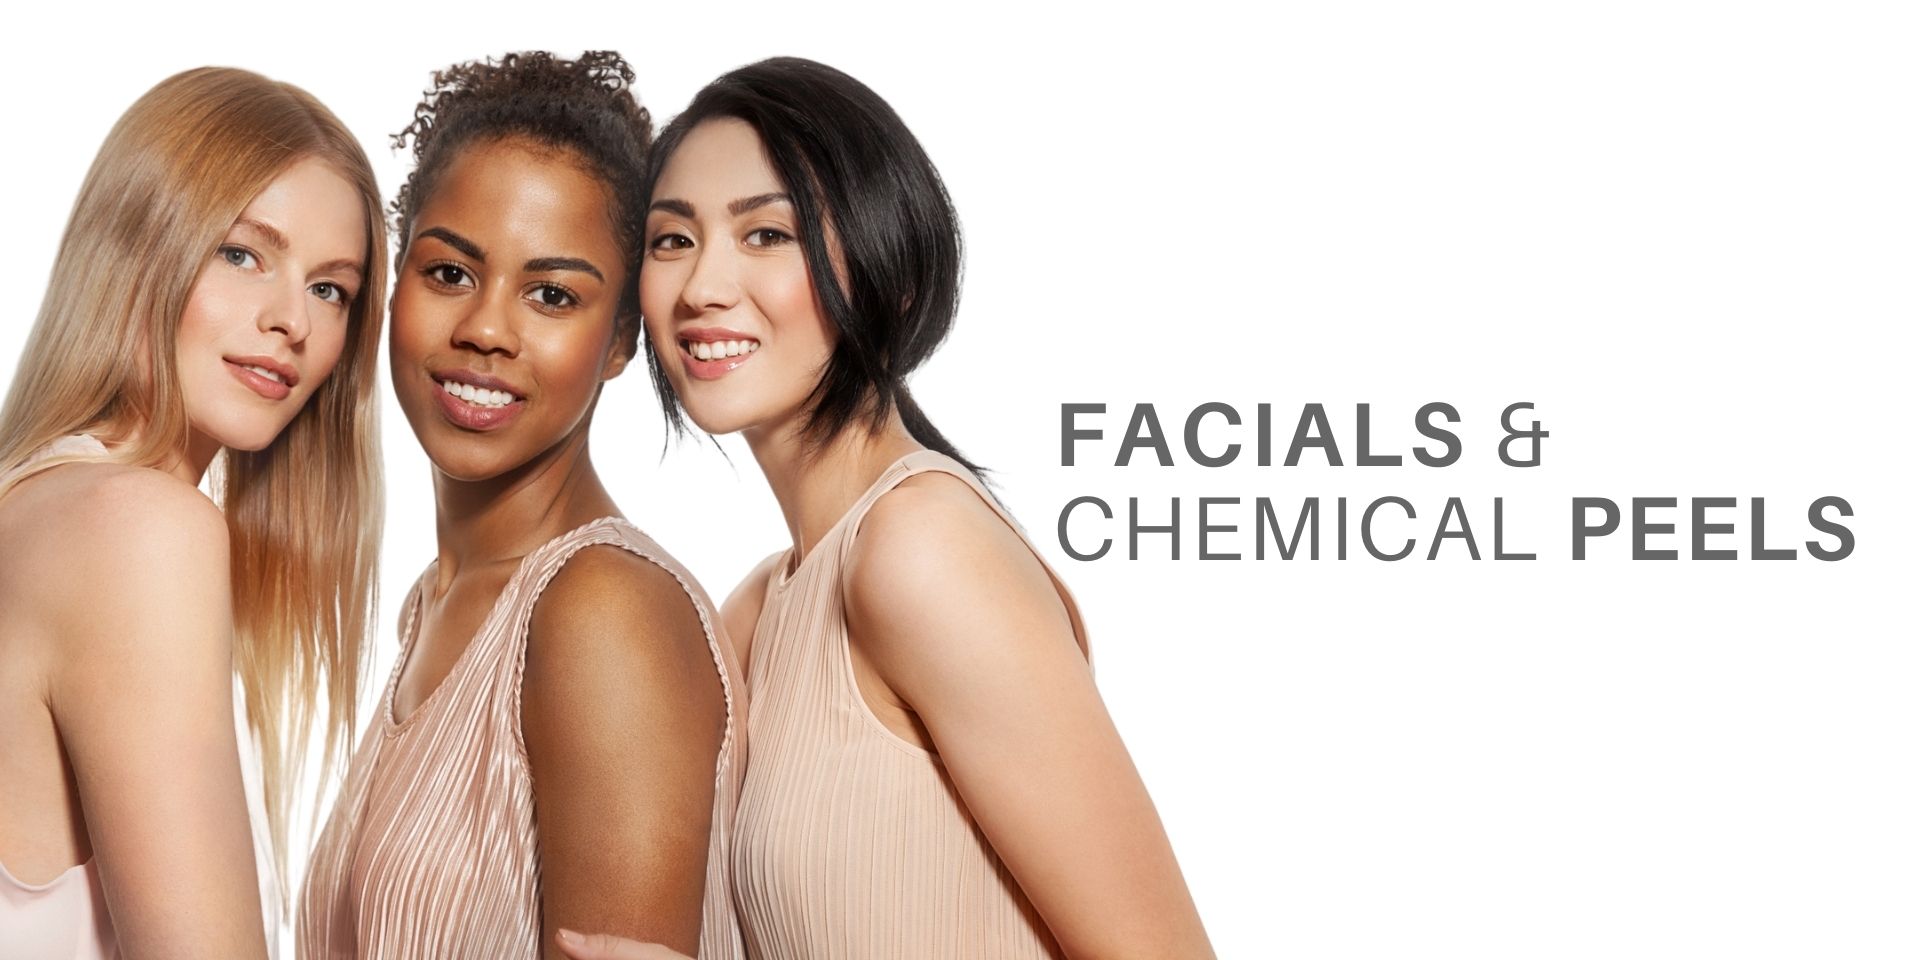 young woman with beautiful faces promoting facials and chemical peels